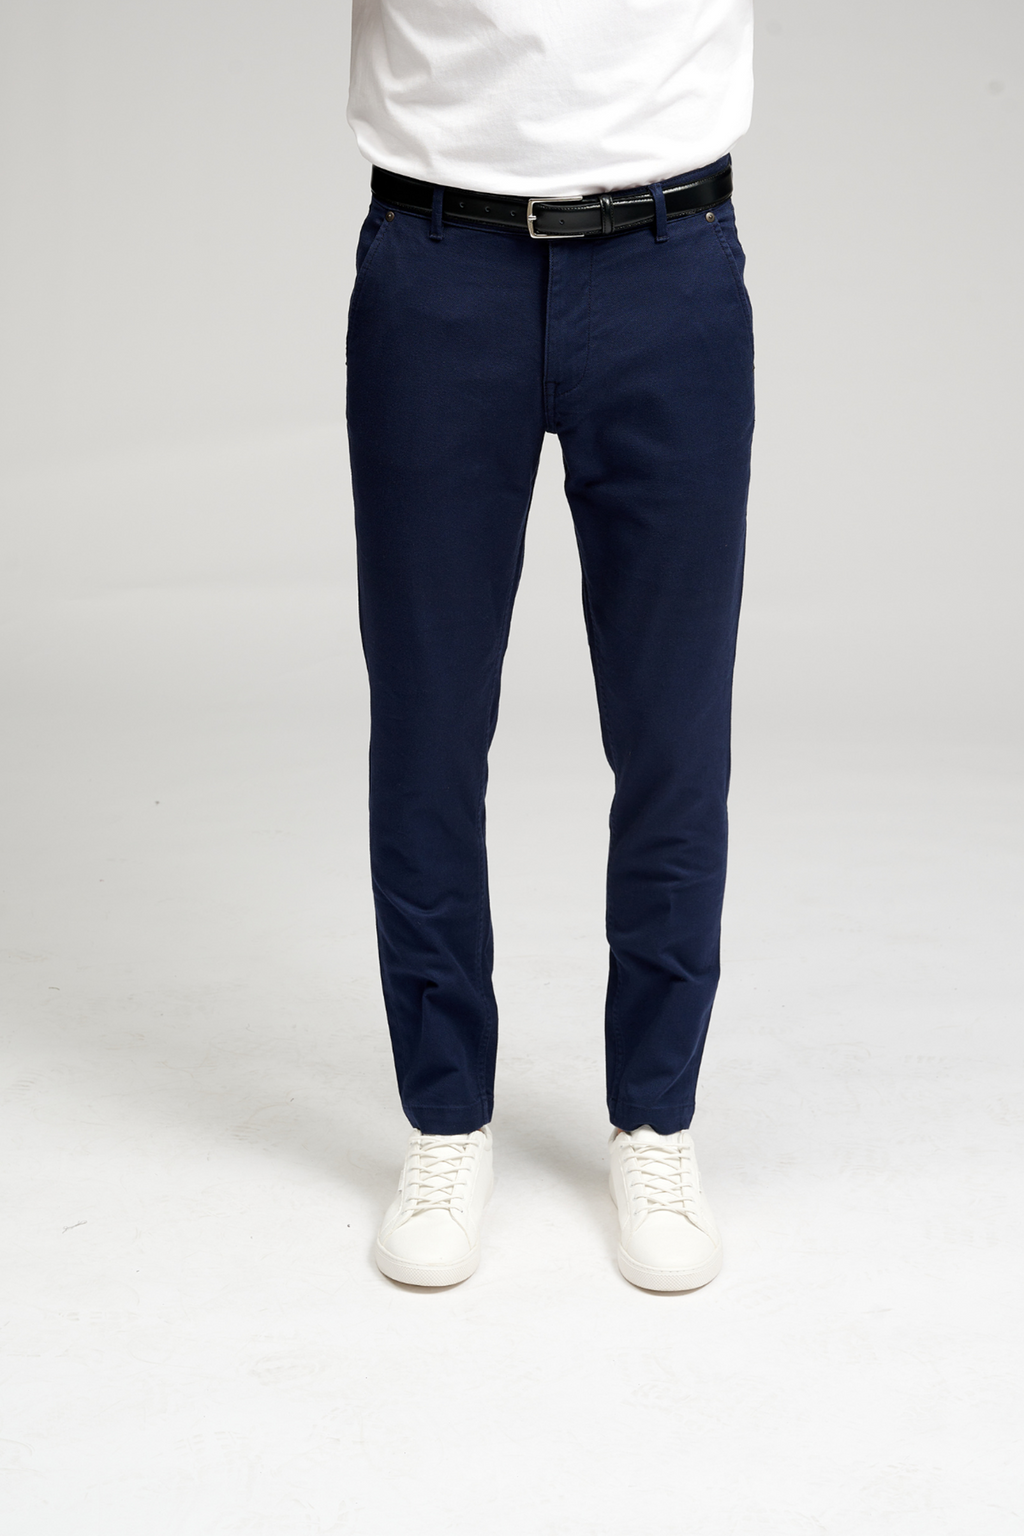 Performance Structure Pants - Navy